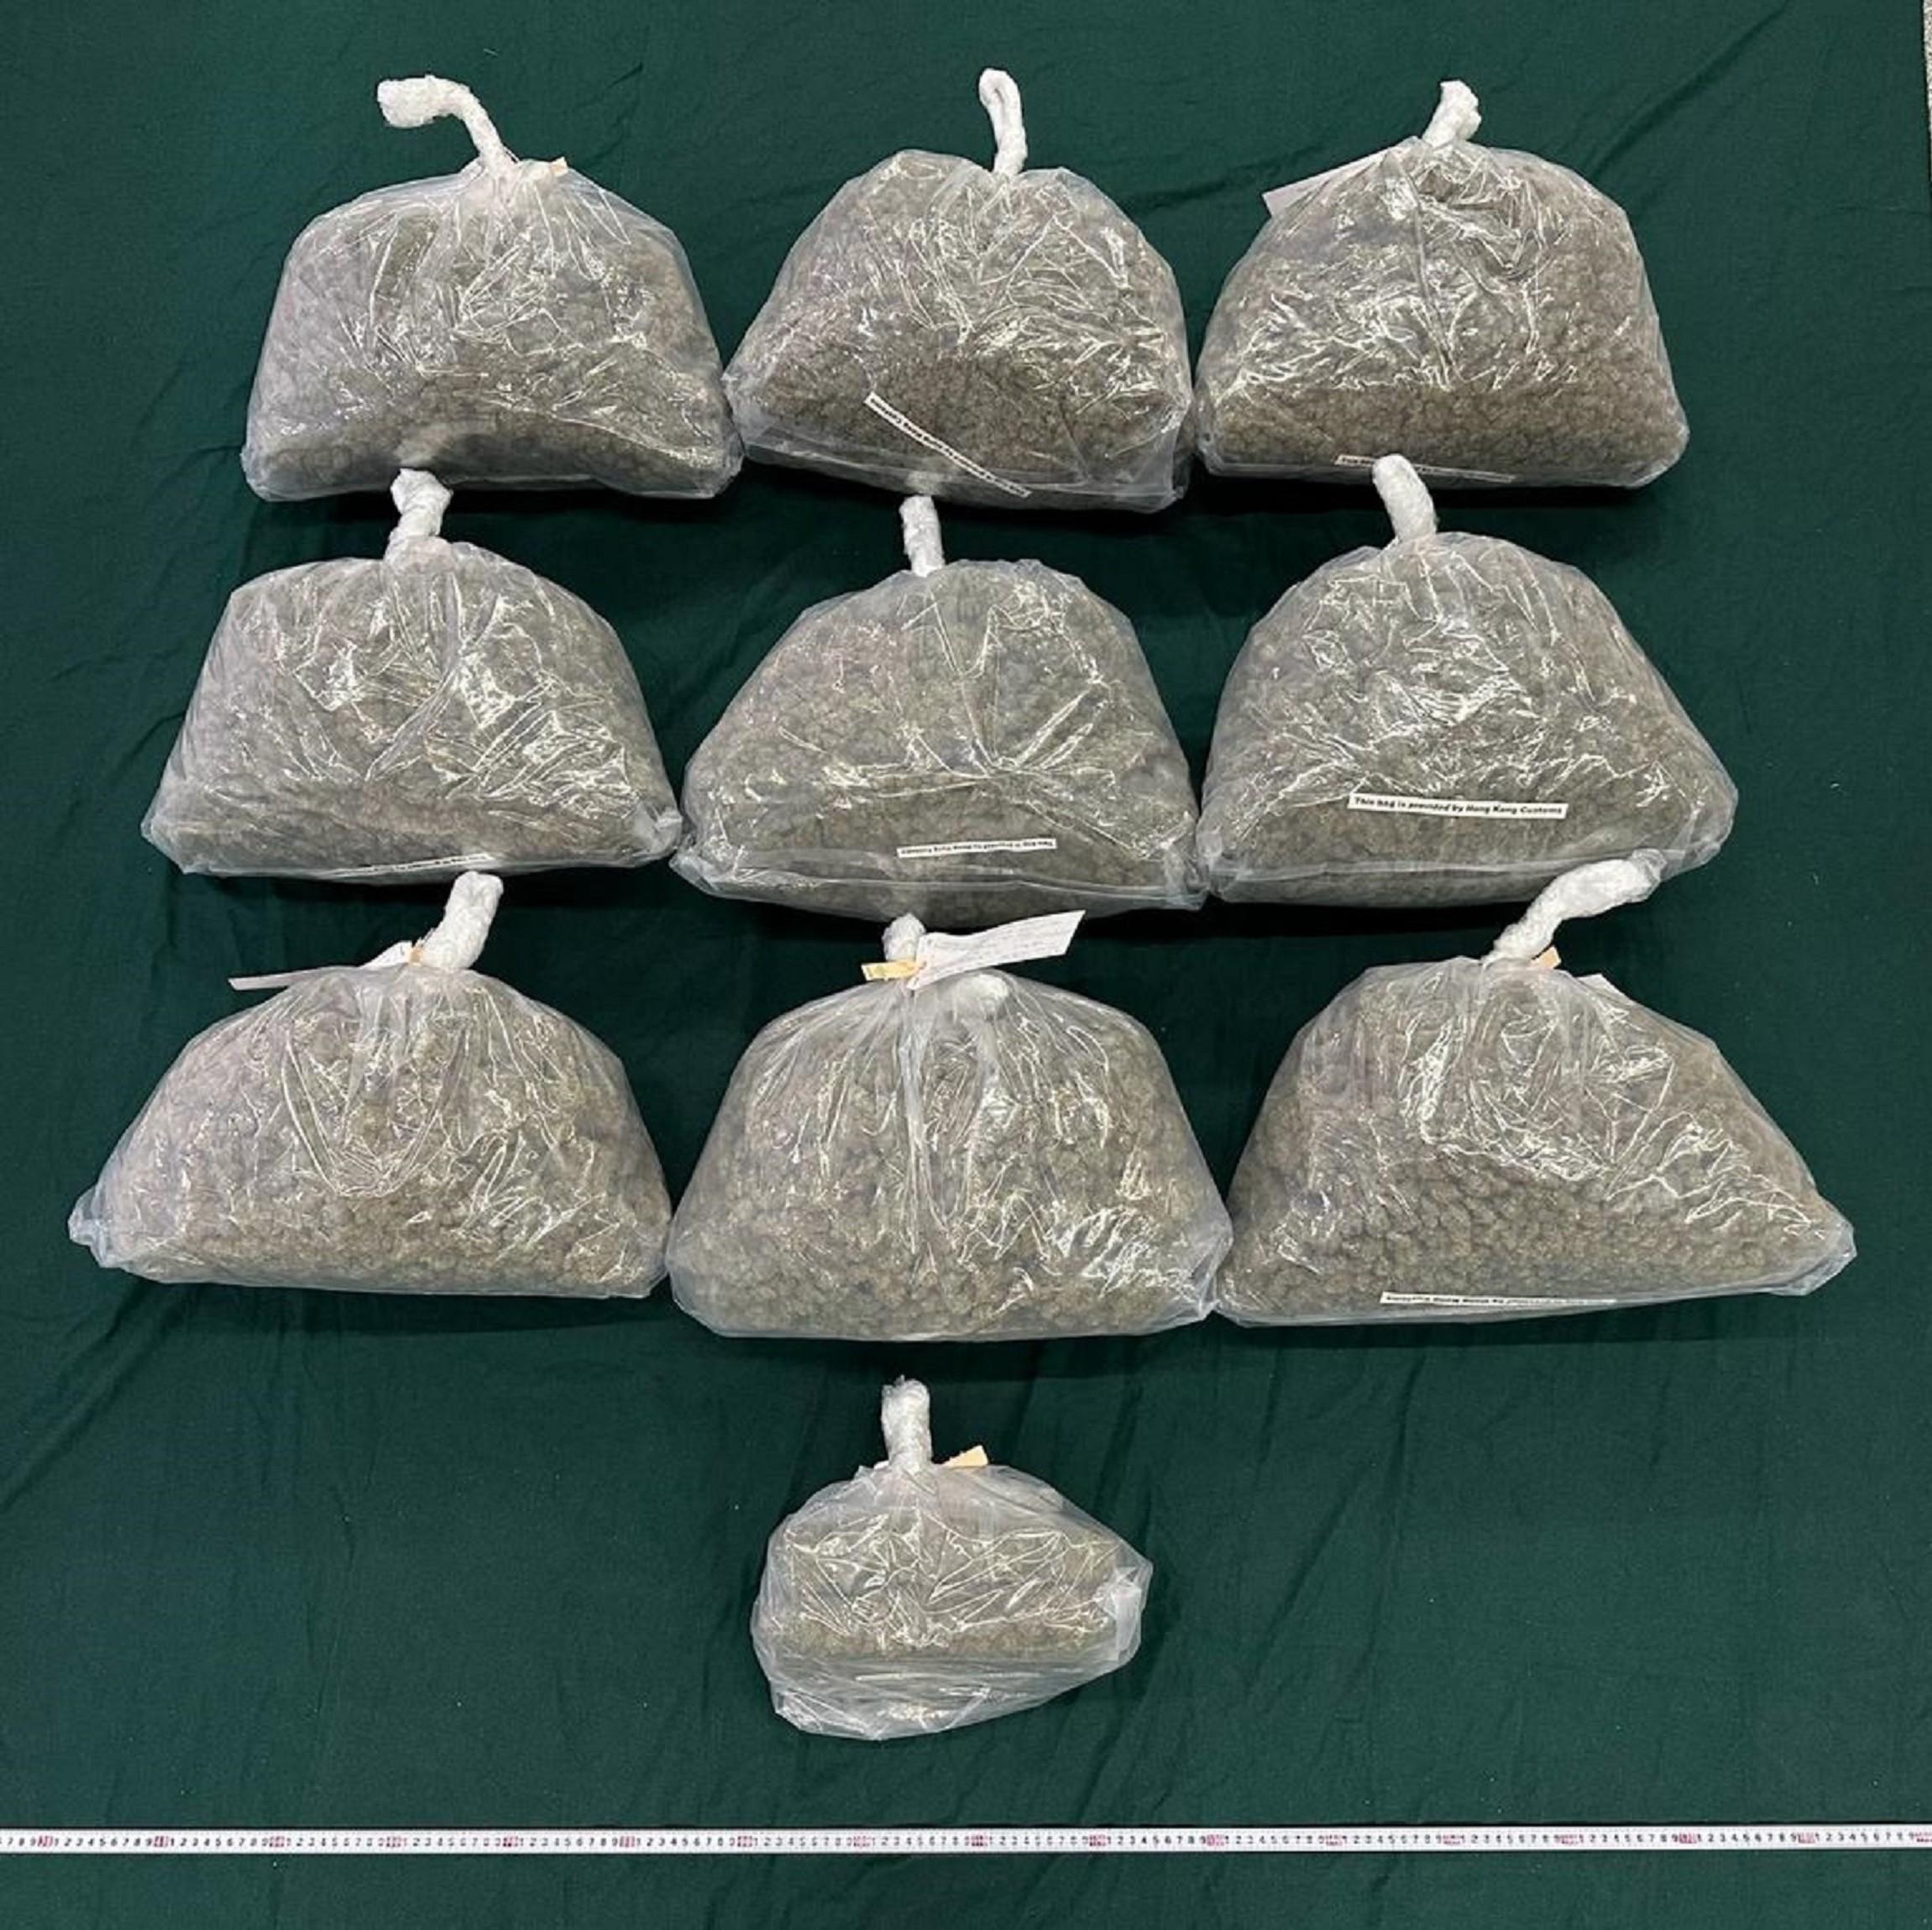 Hong Kong Customs yesterday (May 5) seized about 31 kilograms of suspected cannabis buds with an estimated market value of about $6 million at Hong Kong International Airport. Photo shows the suspected cannabis buds seized by Customs officers.

